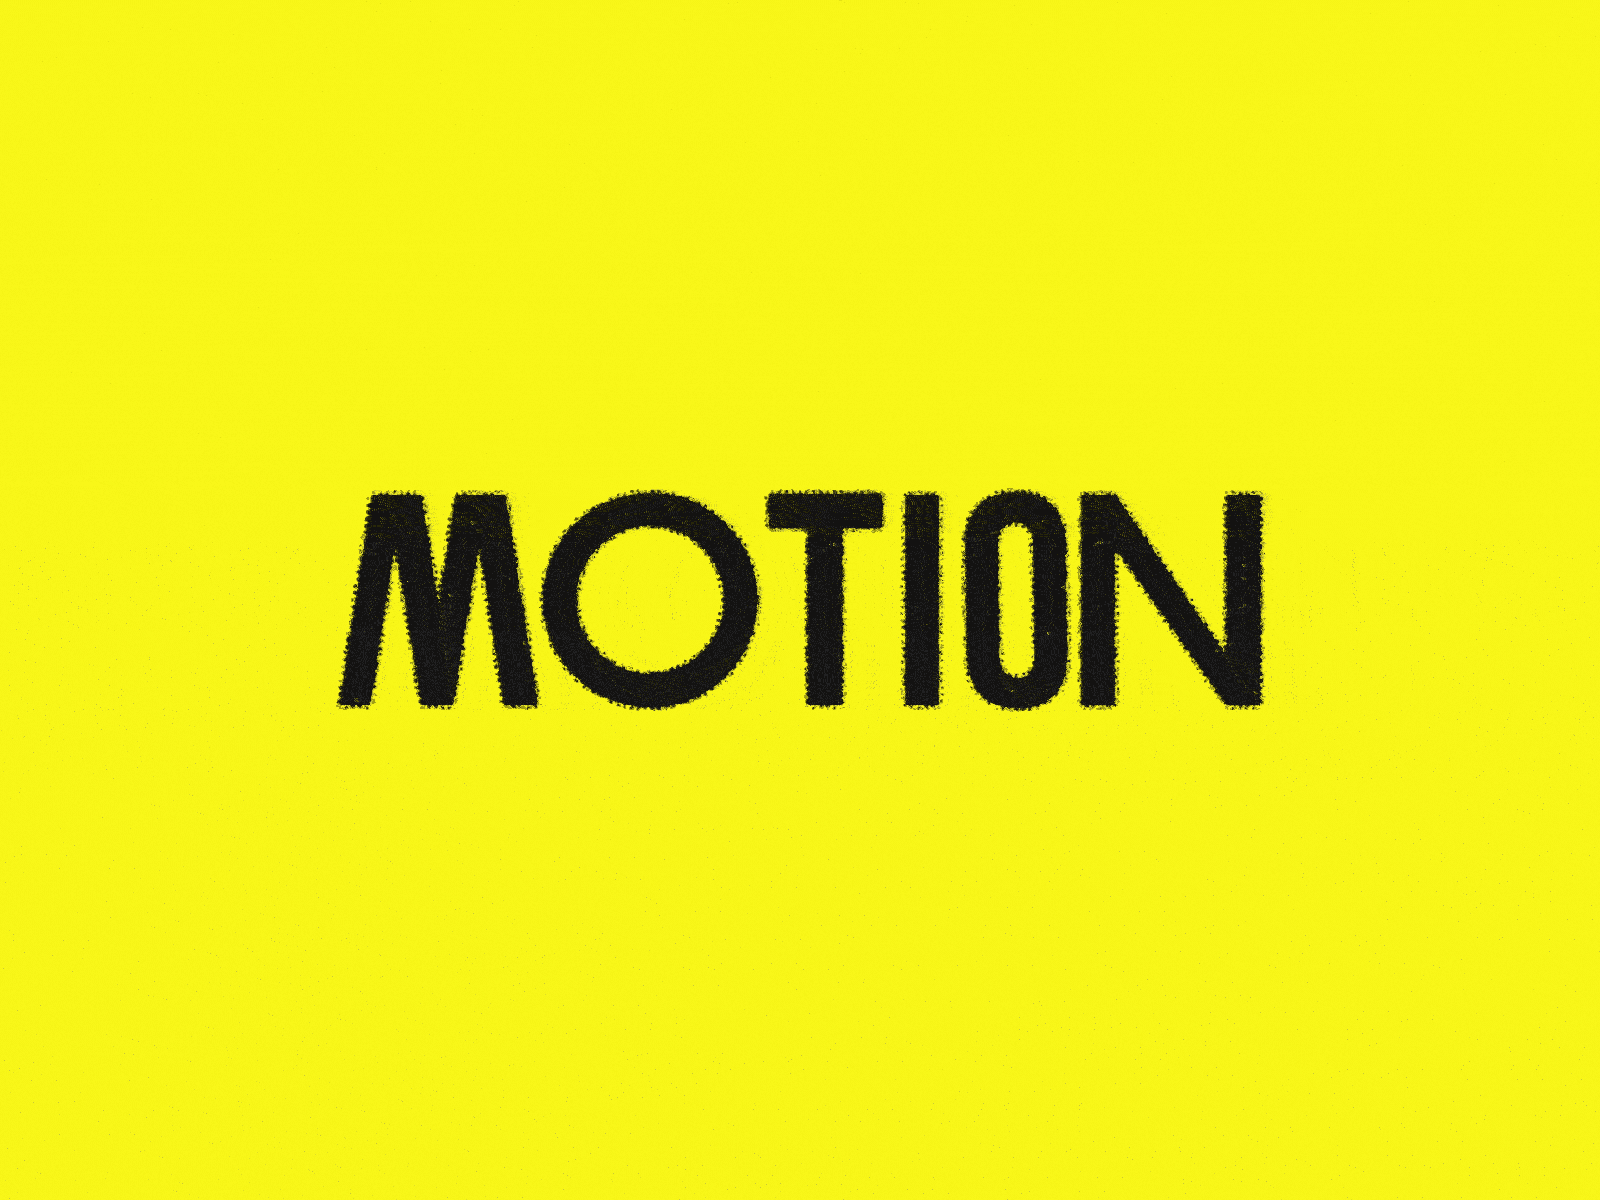 Motion Animation aftereffect animated animated gif animation cartoon cartoon illustration gif animated grain texture illustration logo logo design logodesign logotype loop motion design motiongraphics vector